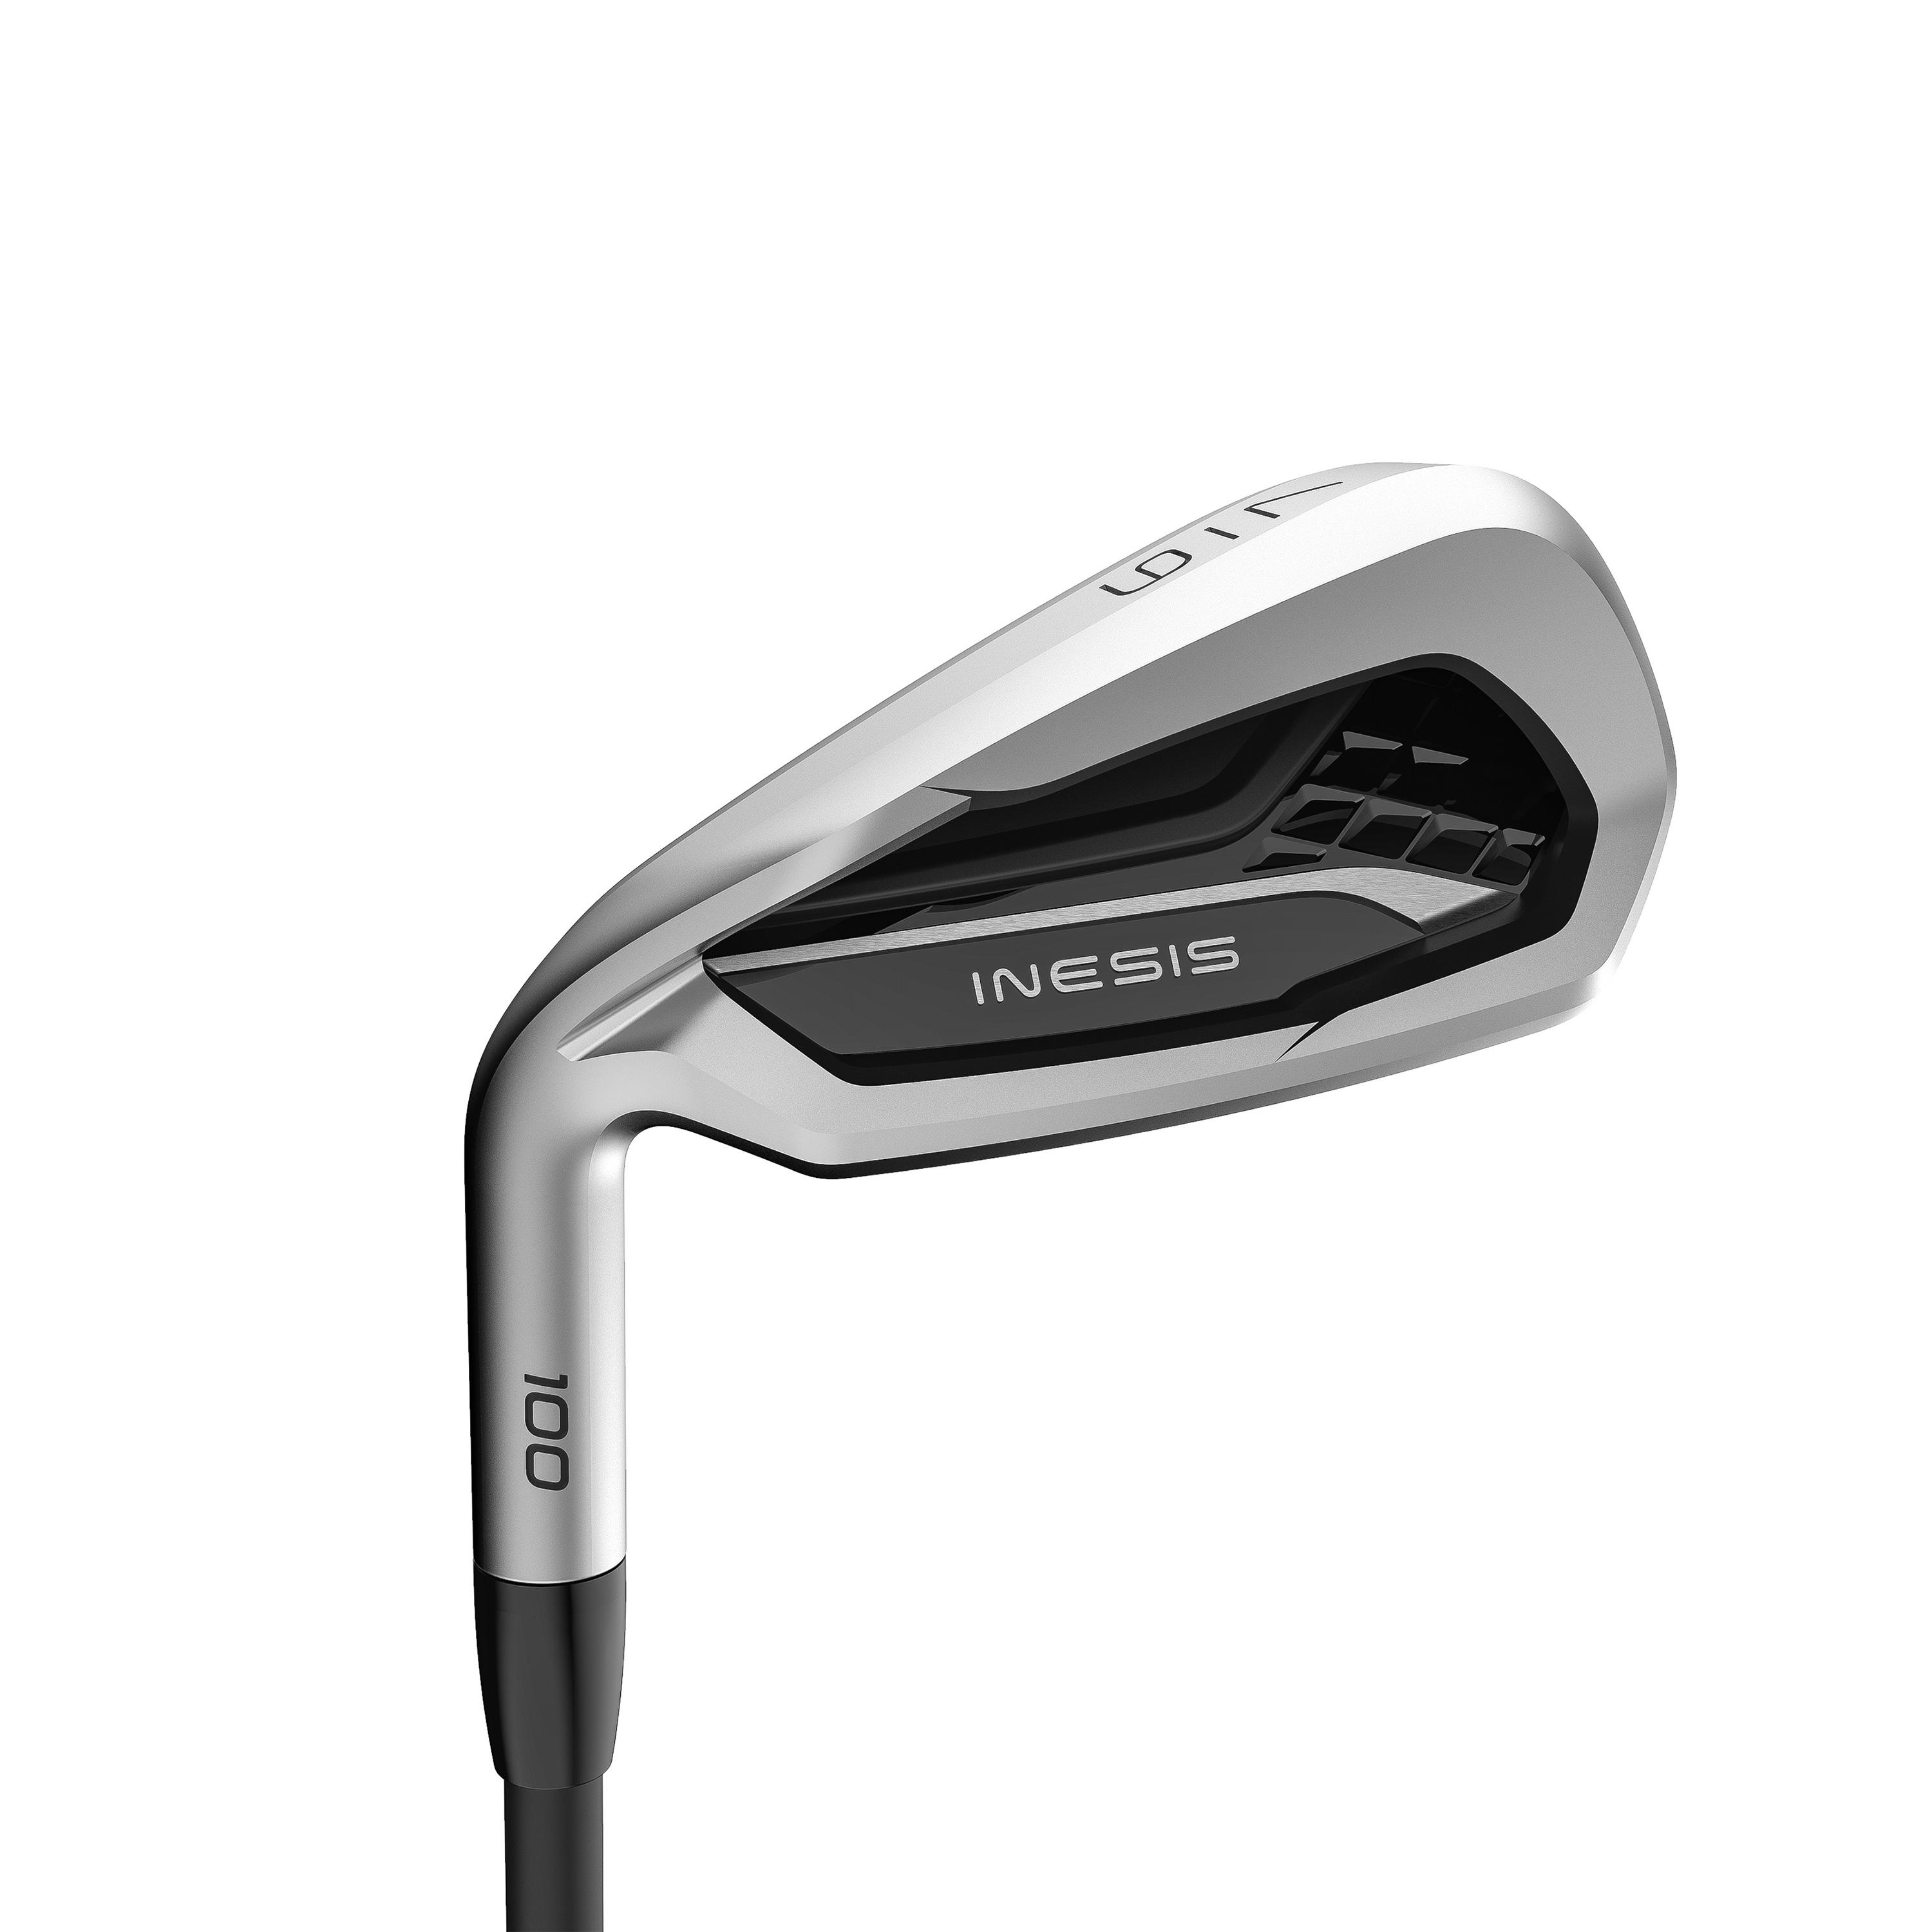 INESIS ADULT INDIVIDUAL GOLF IRON 100 LEFT HANDED SIZE 1 GRAPHITE - INESIS 100